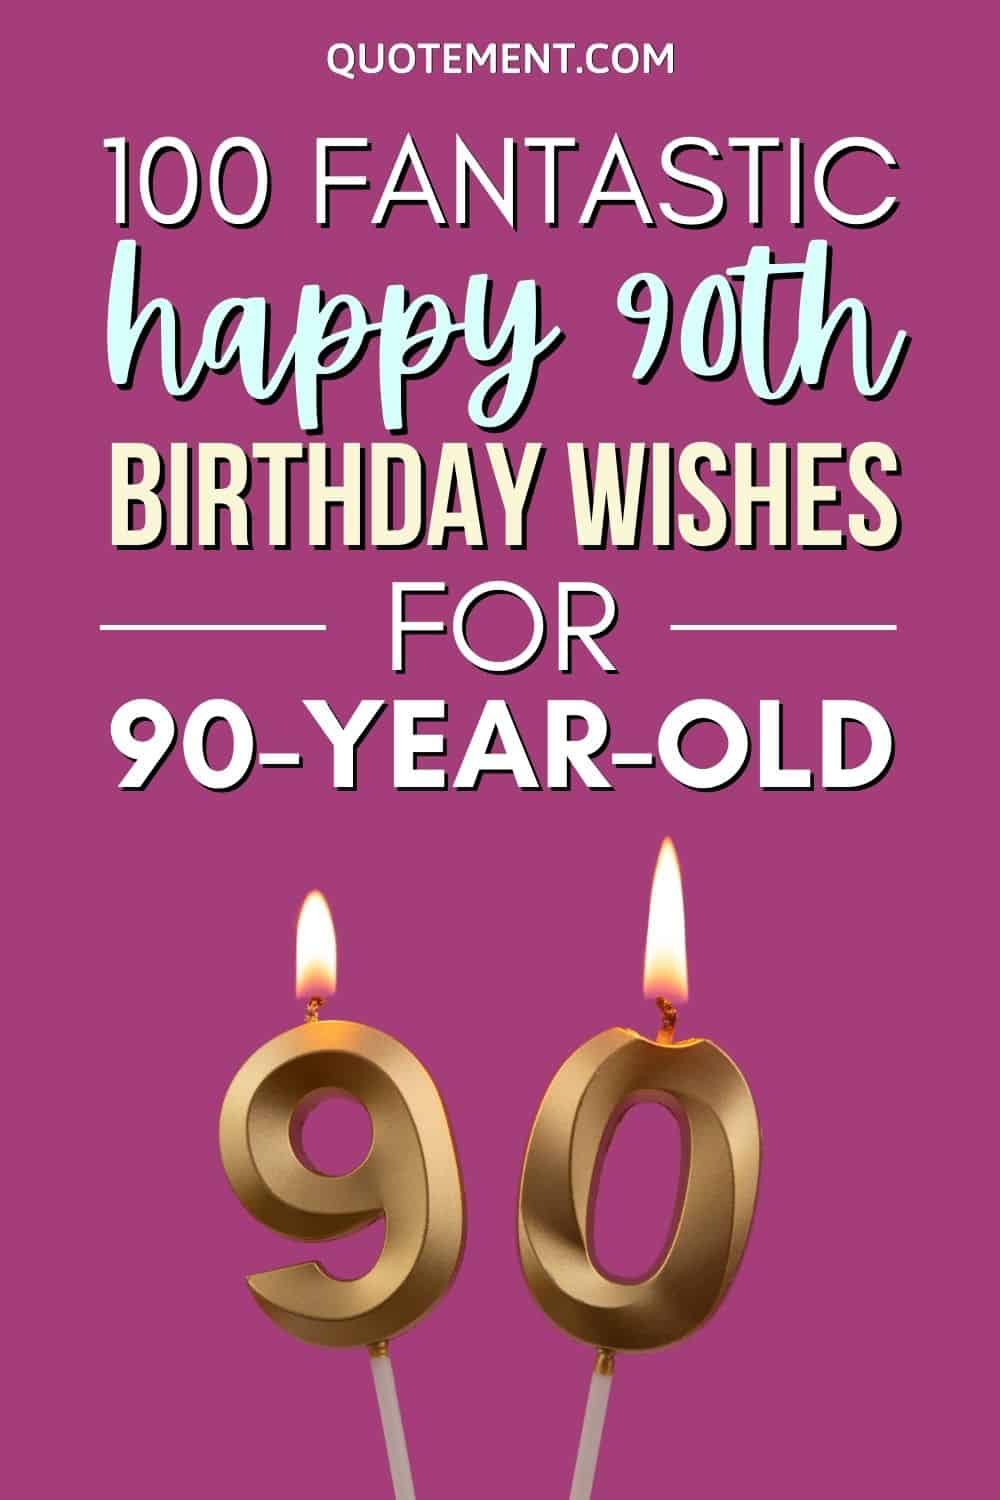 100 Fantastic Happy 90th Birthday Wishes For 90-Year-Old